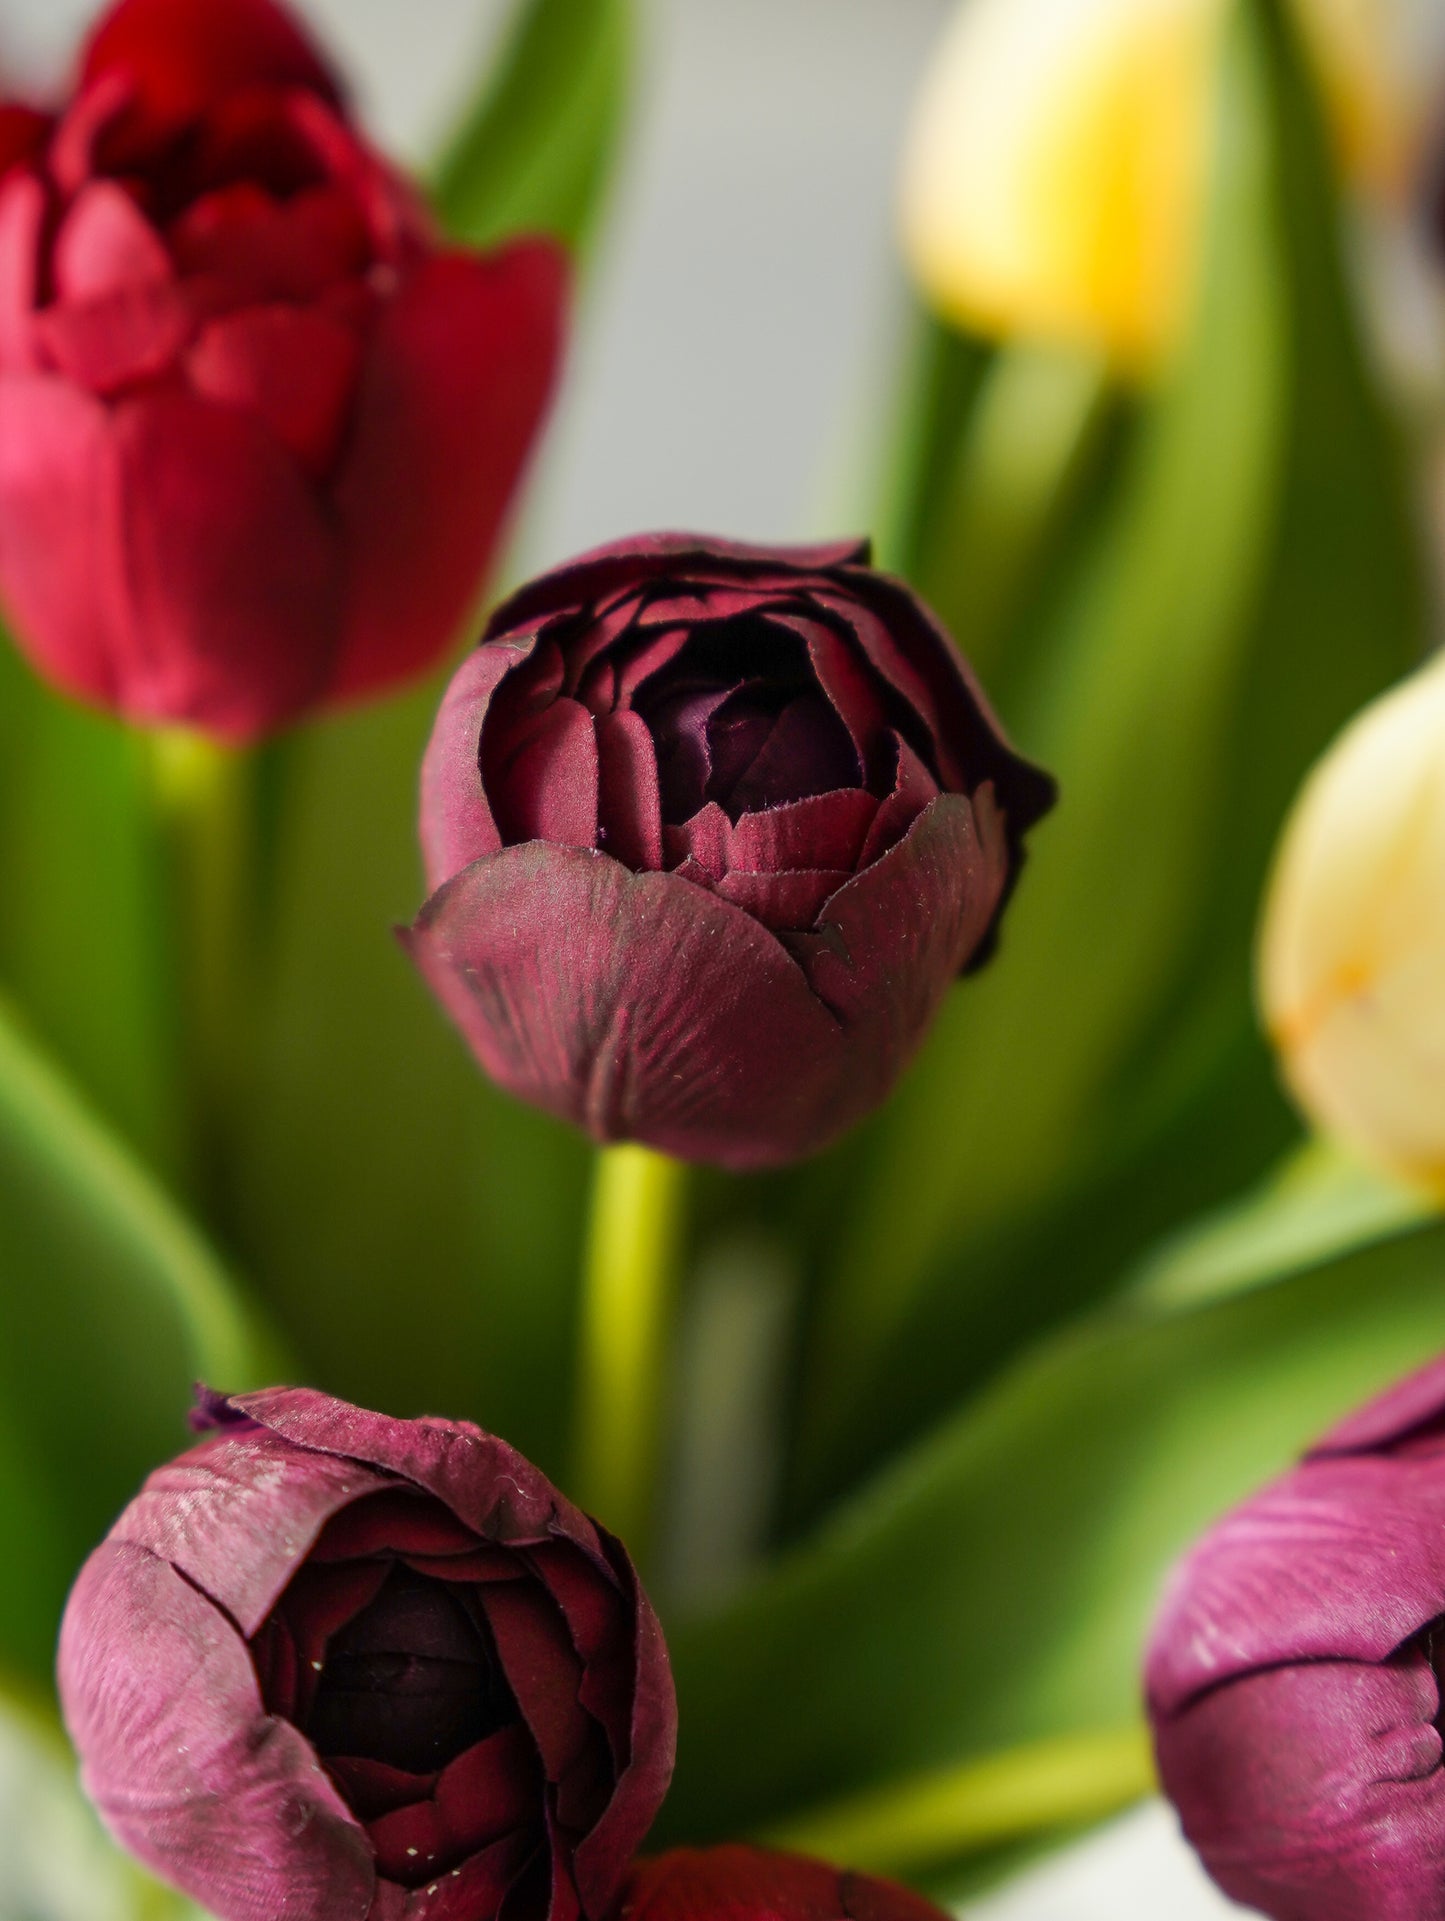 Real Touch Hybrid Tulip Bundle